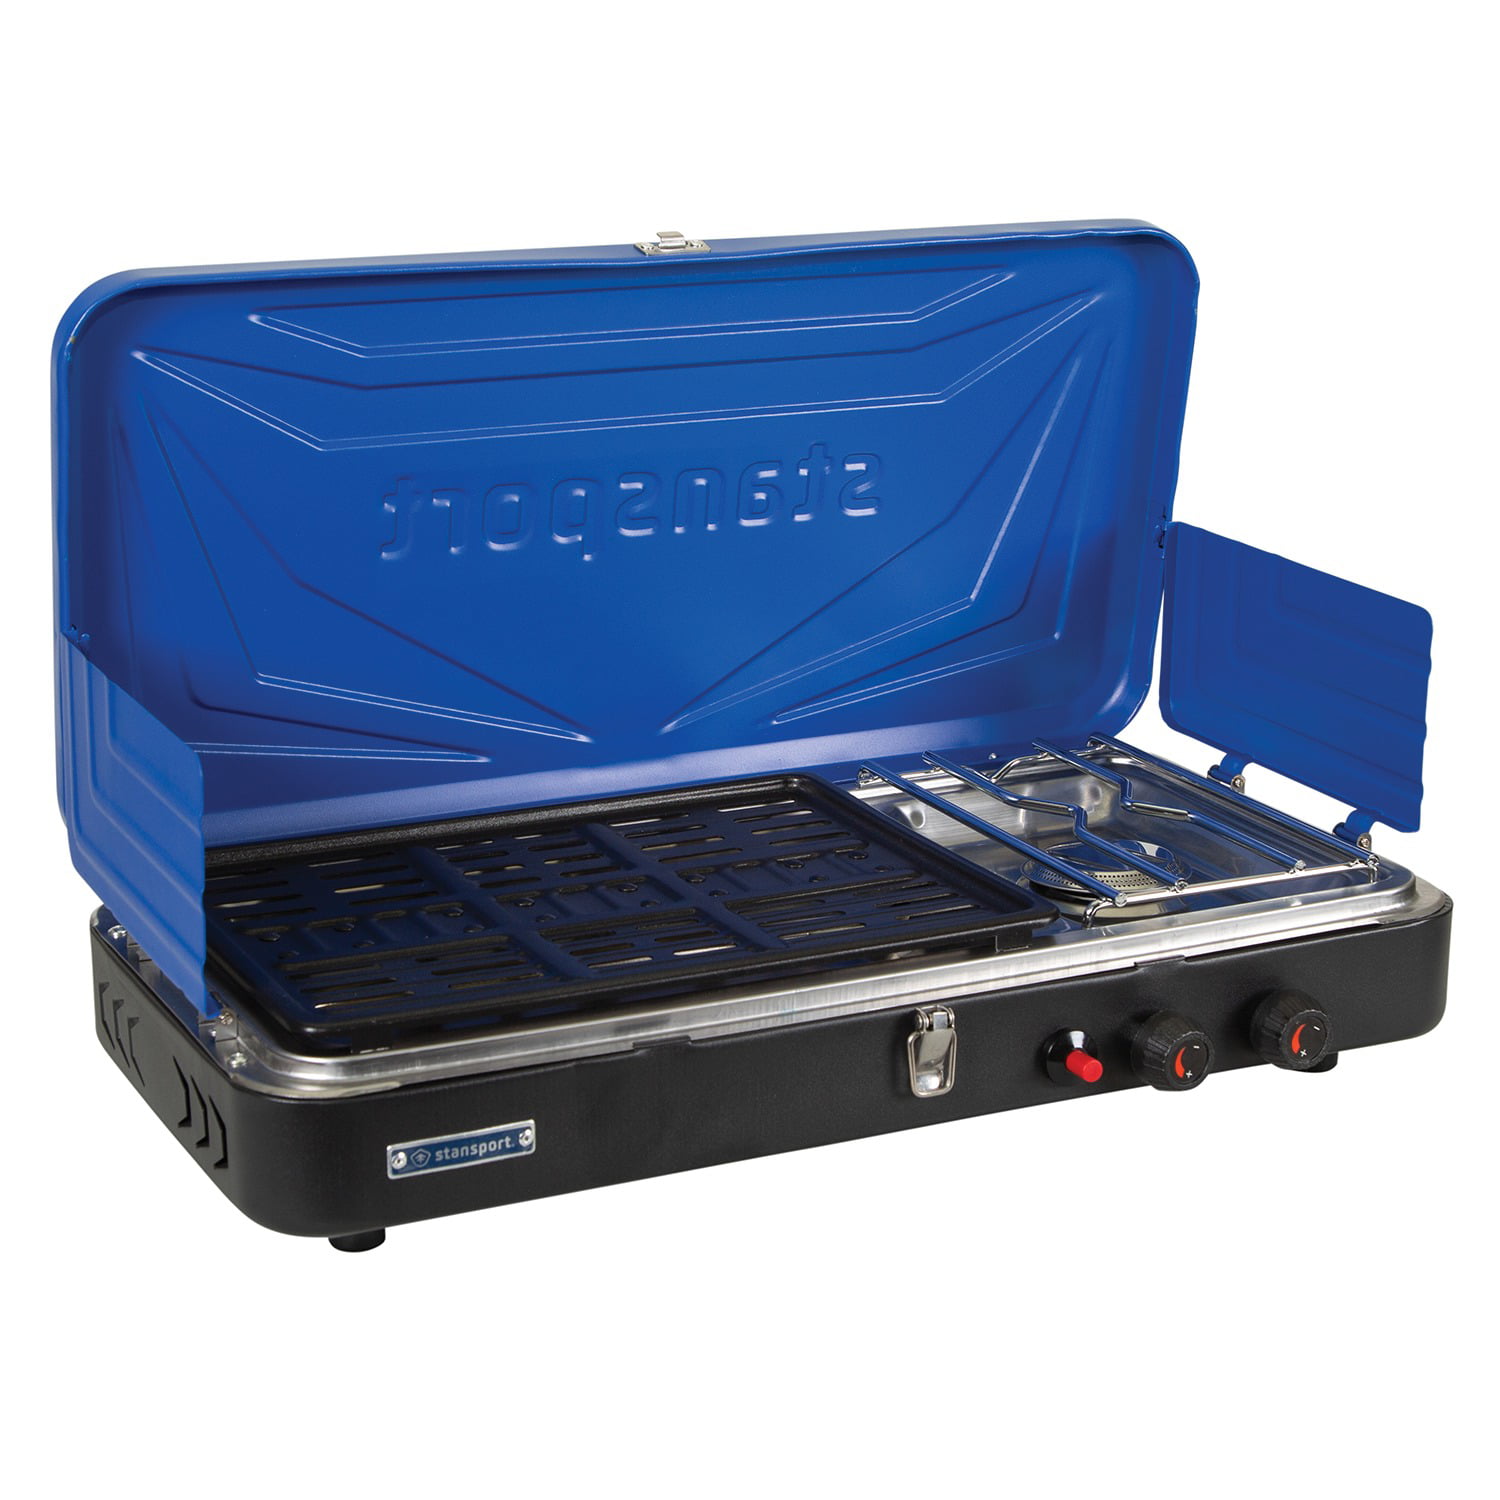 Stansport Propane Stove And Grill Combo